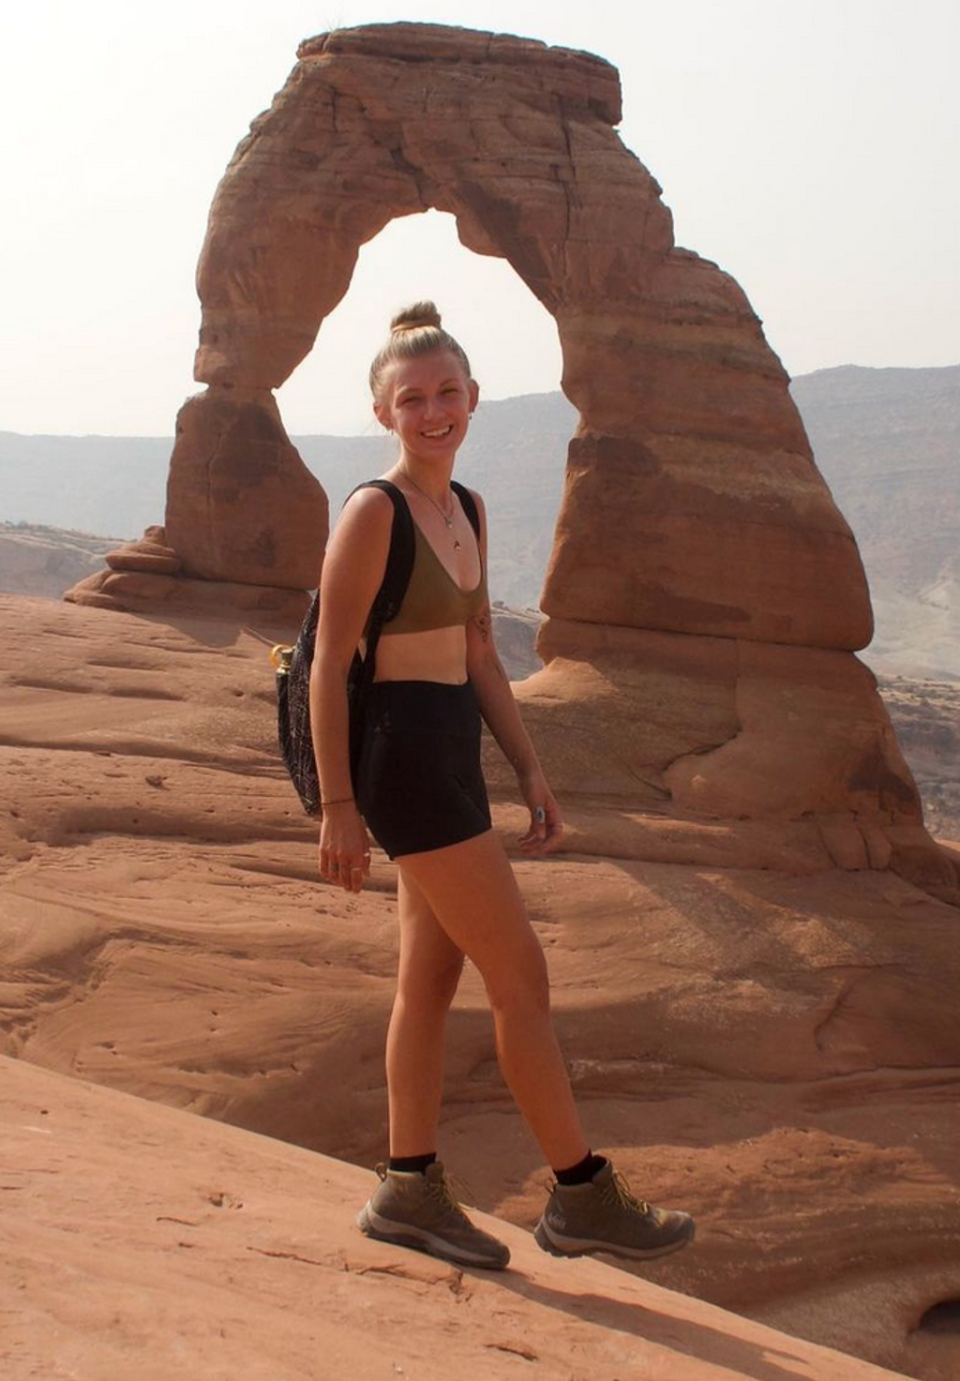 Gabby Petito posted several pictures of her and Mr Laundrie at the Arches National Park in Utah on the same day as police attended an alleged ‘domestic violence’ incident (Instagram/GabsPetito)